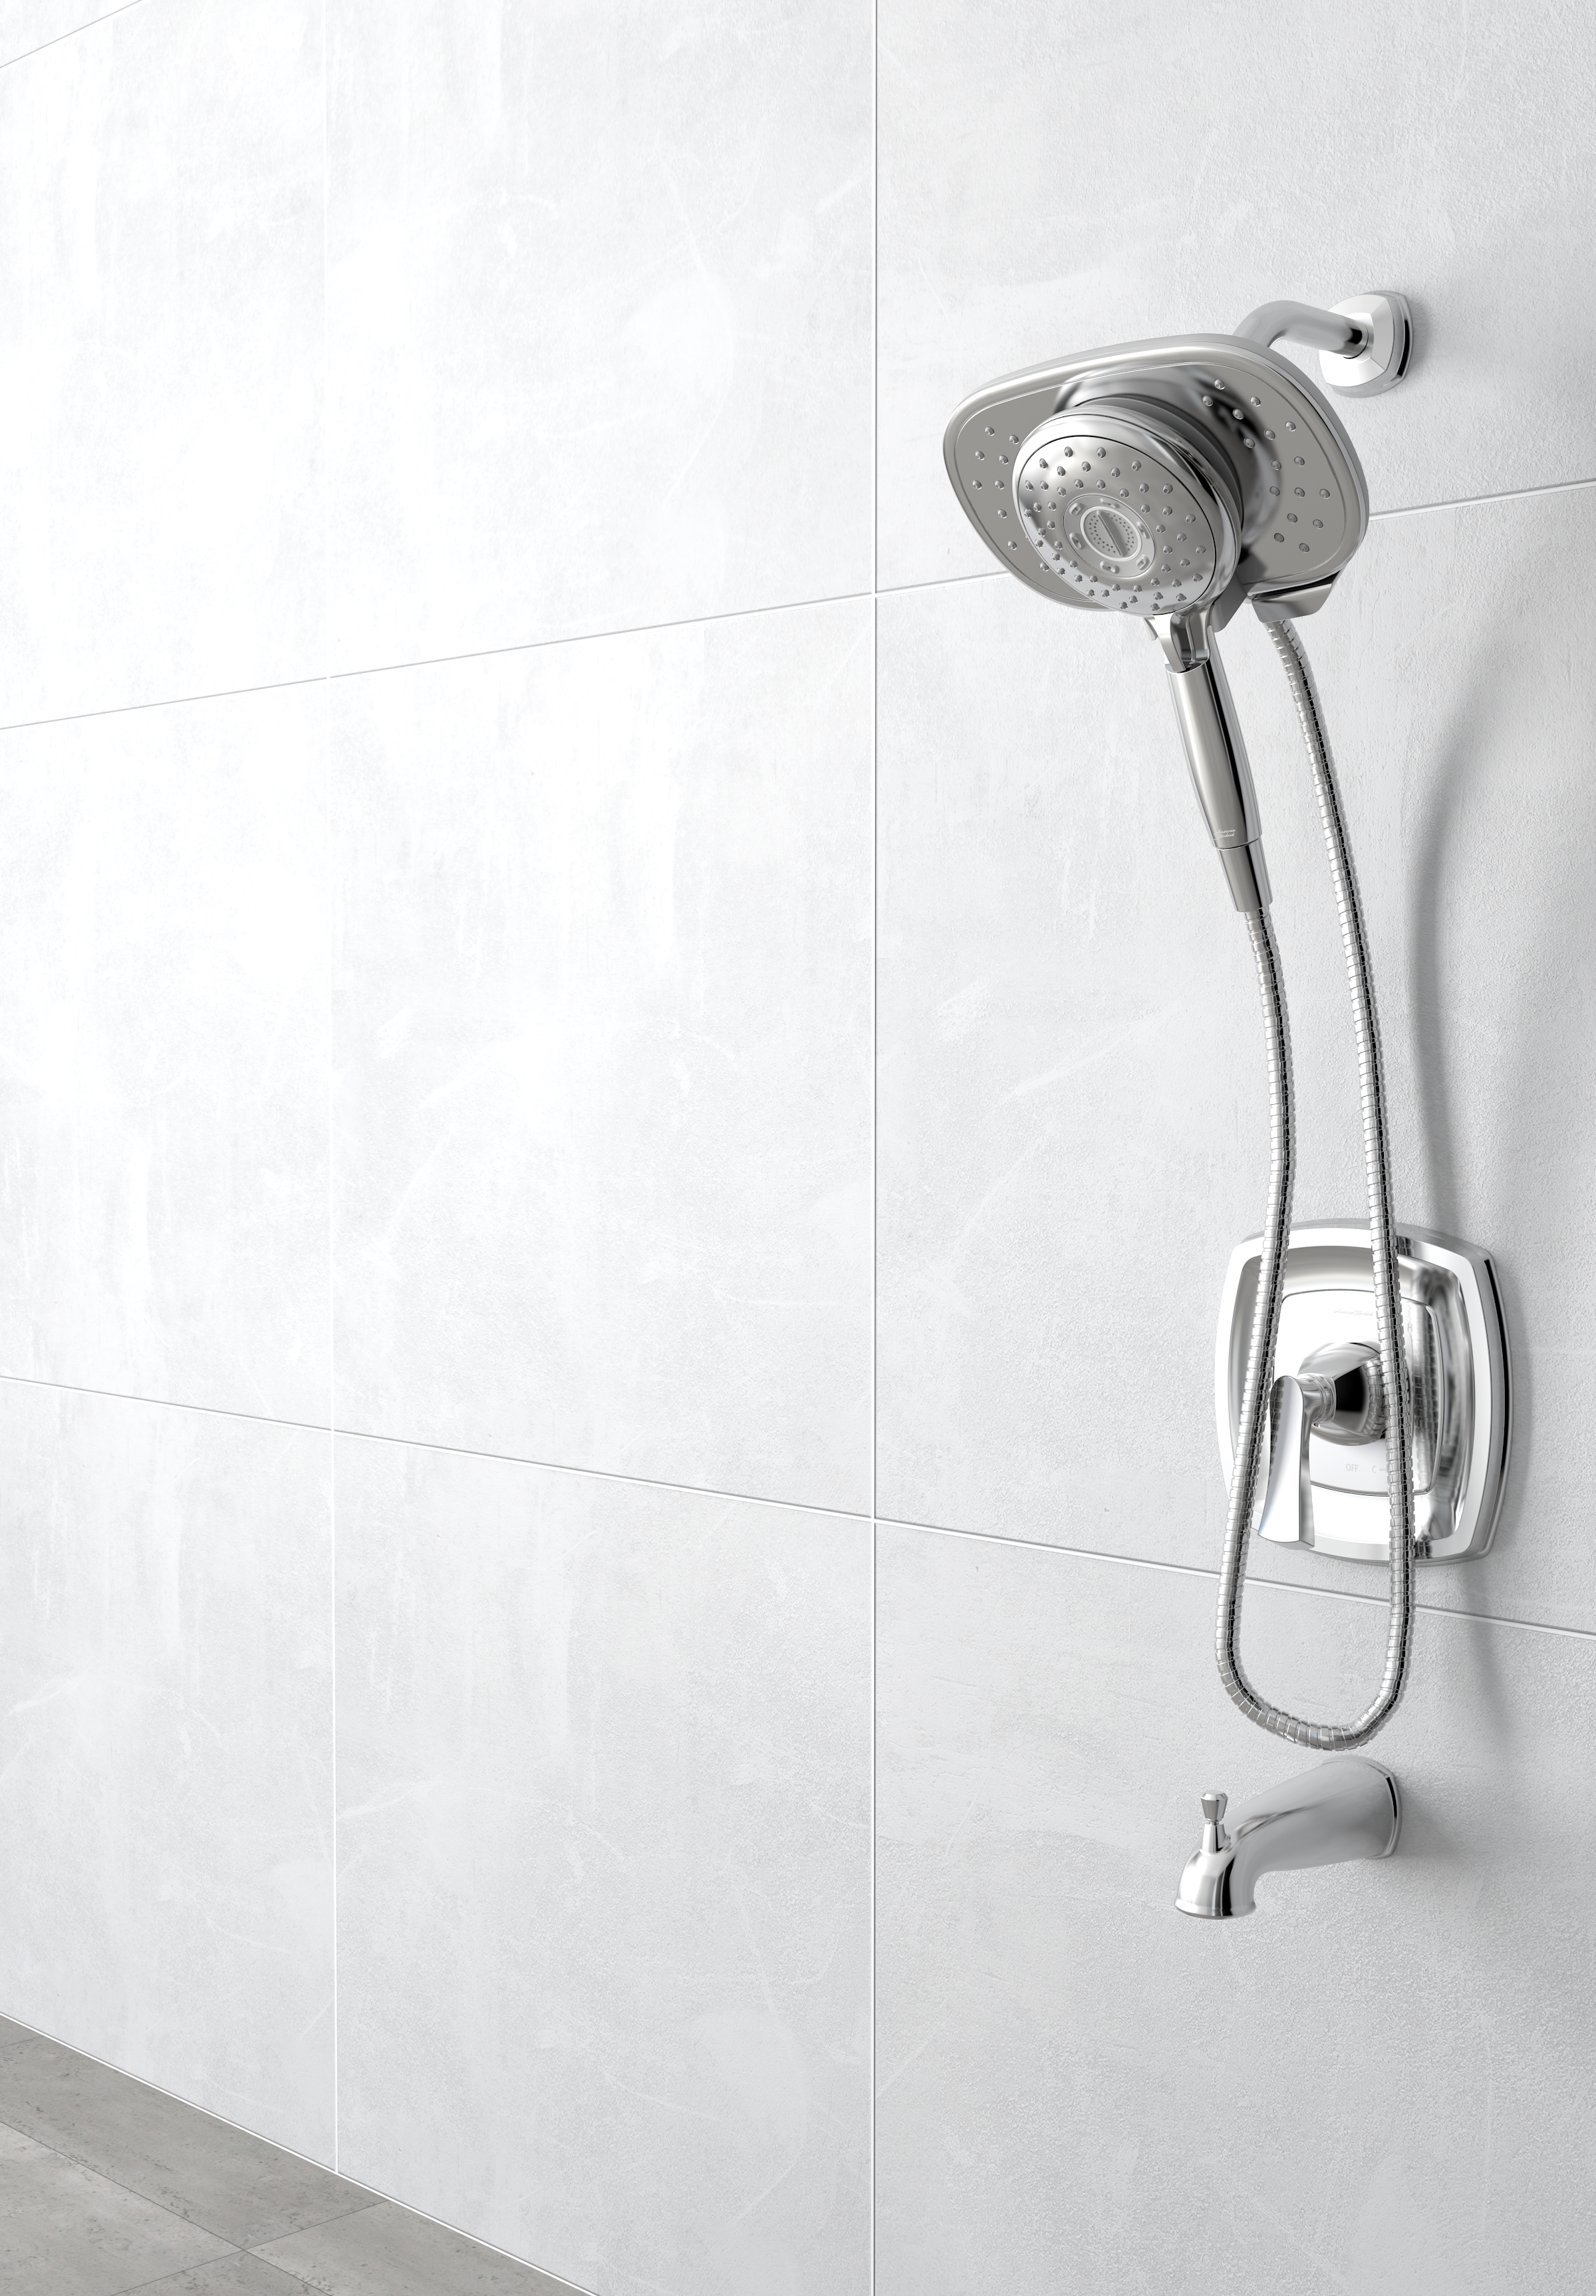 Kaleta 2.5 GPM Tub and Shower Trim Kit with Spectra Duo Showerhead and Ceramic Disc Valve Cartridge with Lever Handle